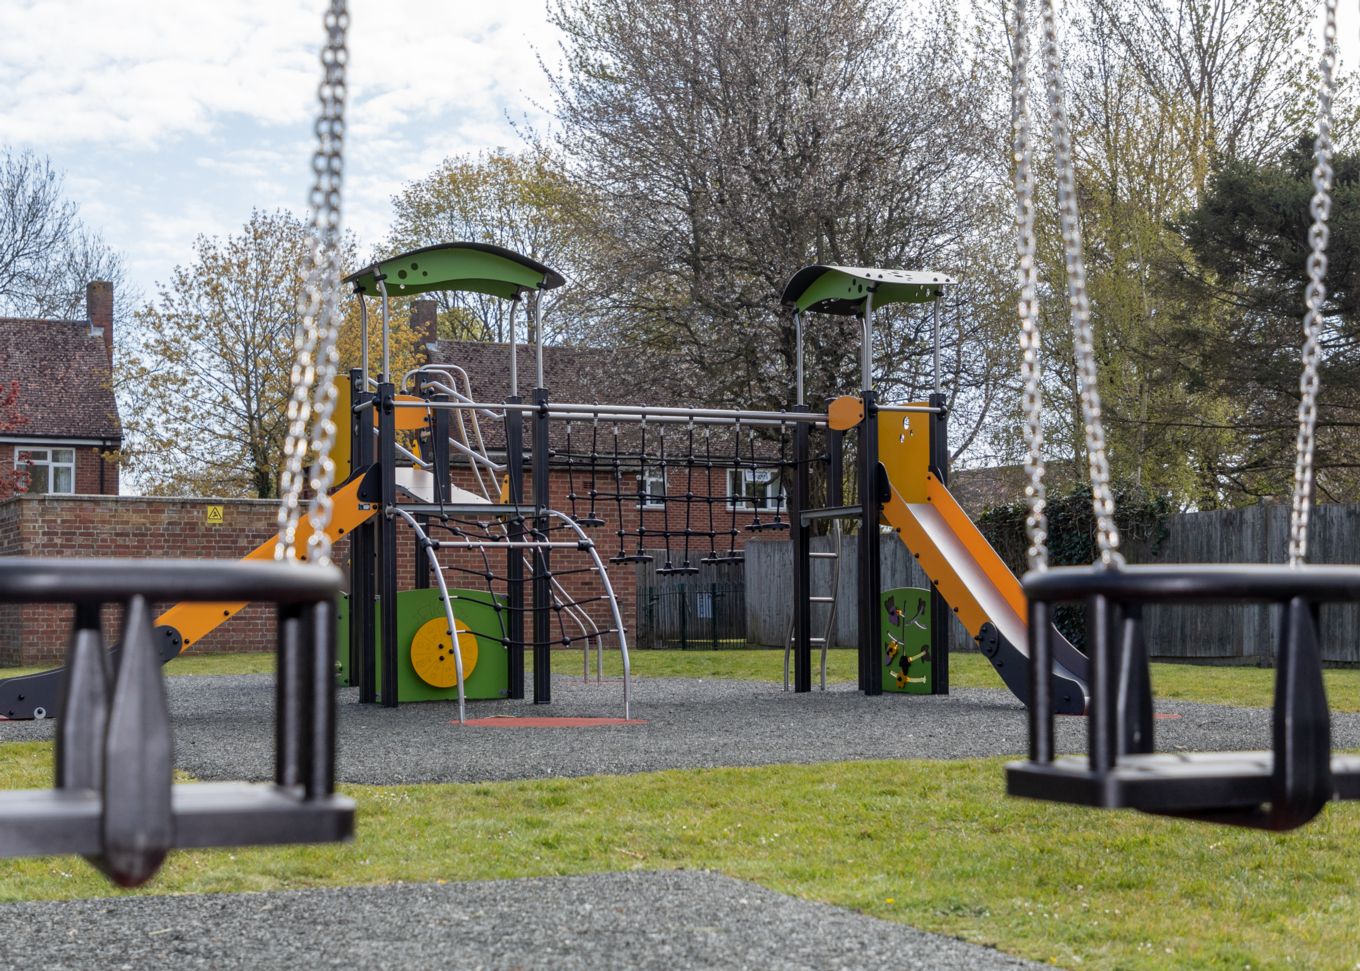 The New Playpark located on the Officers Patch